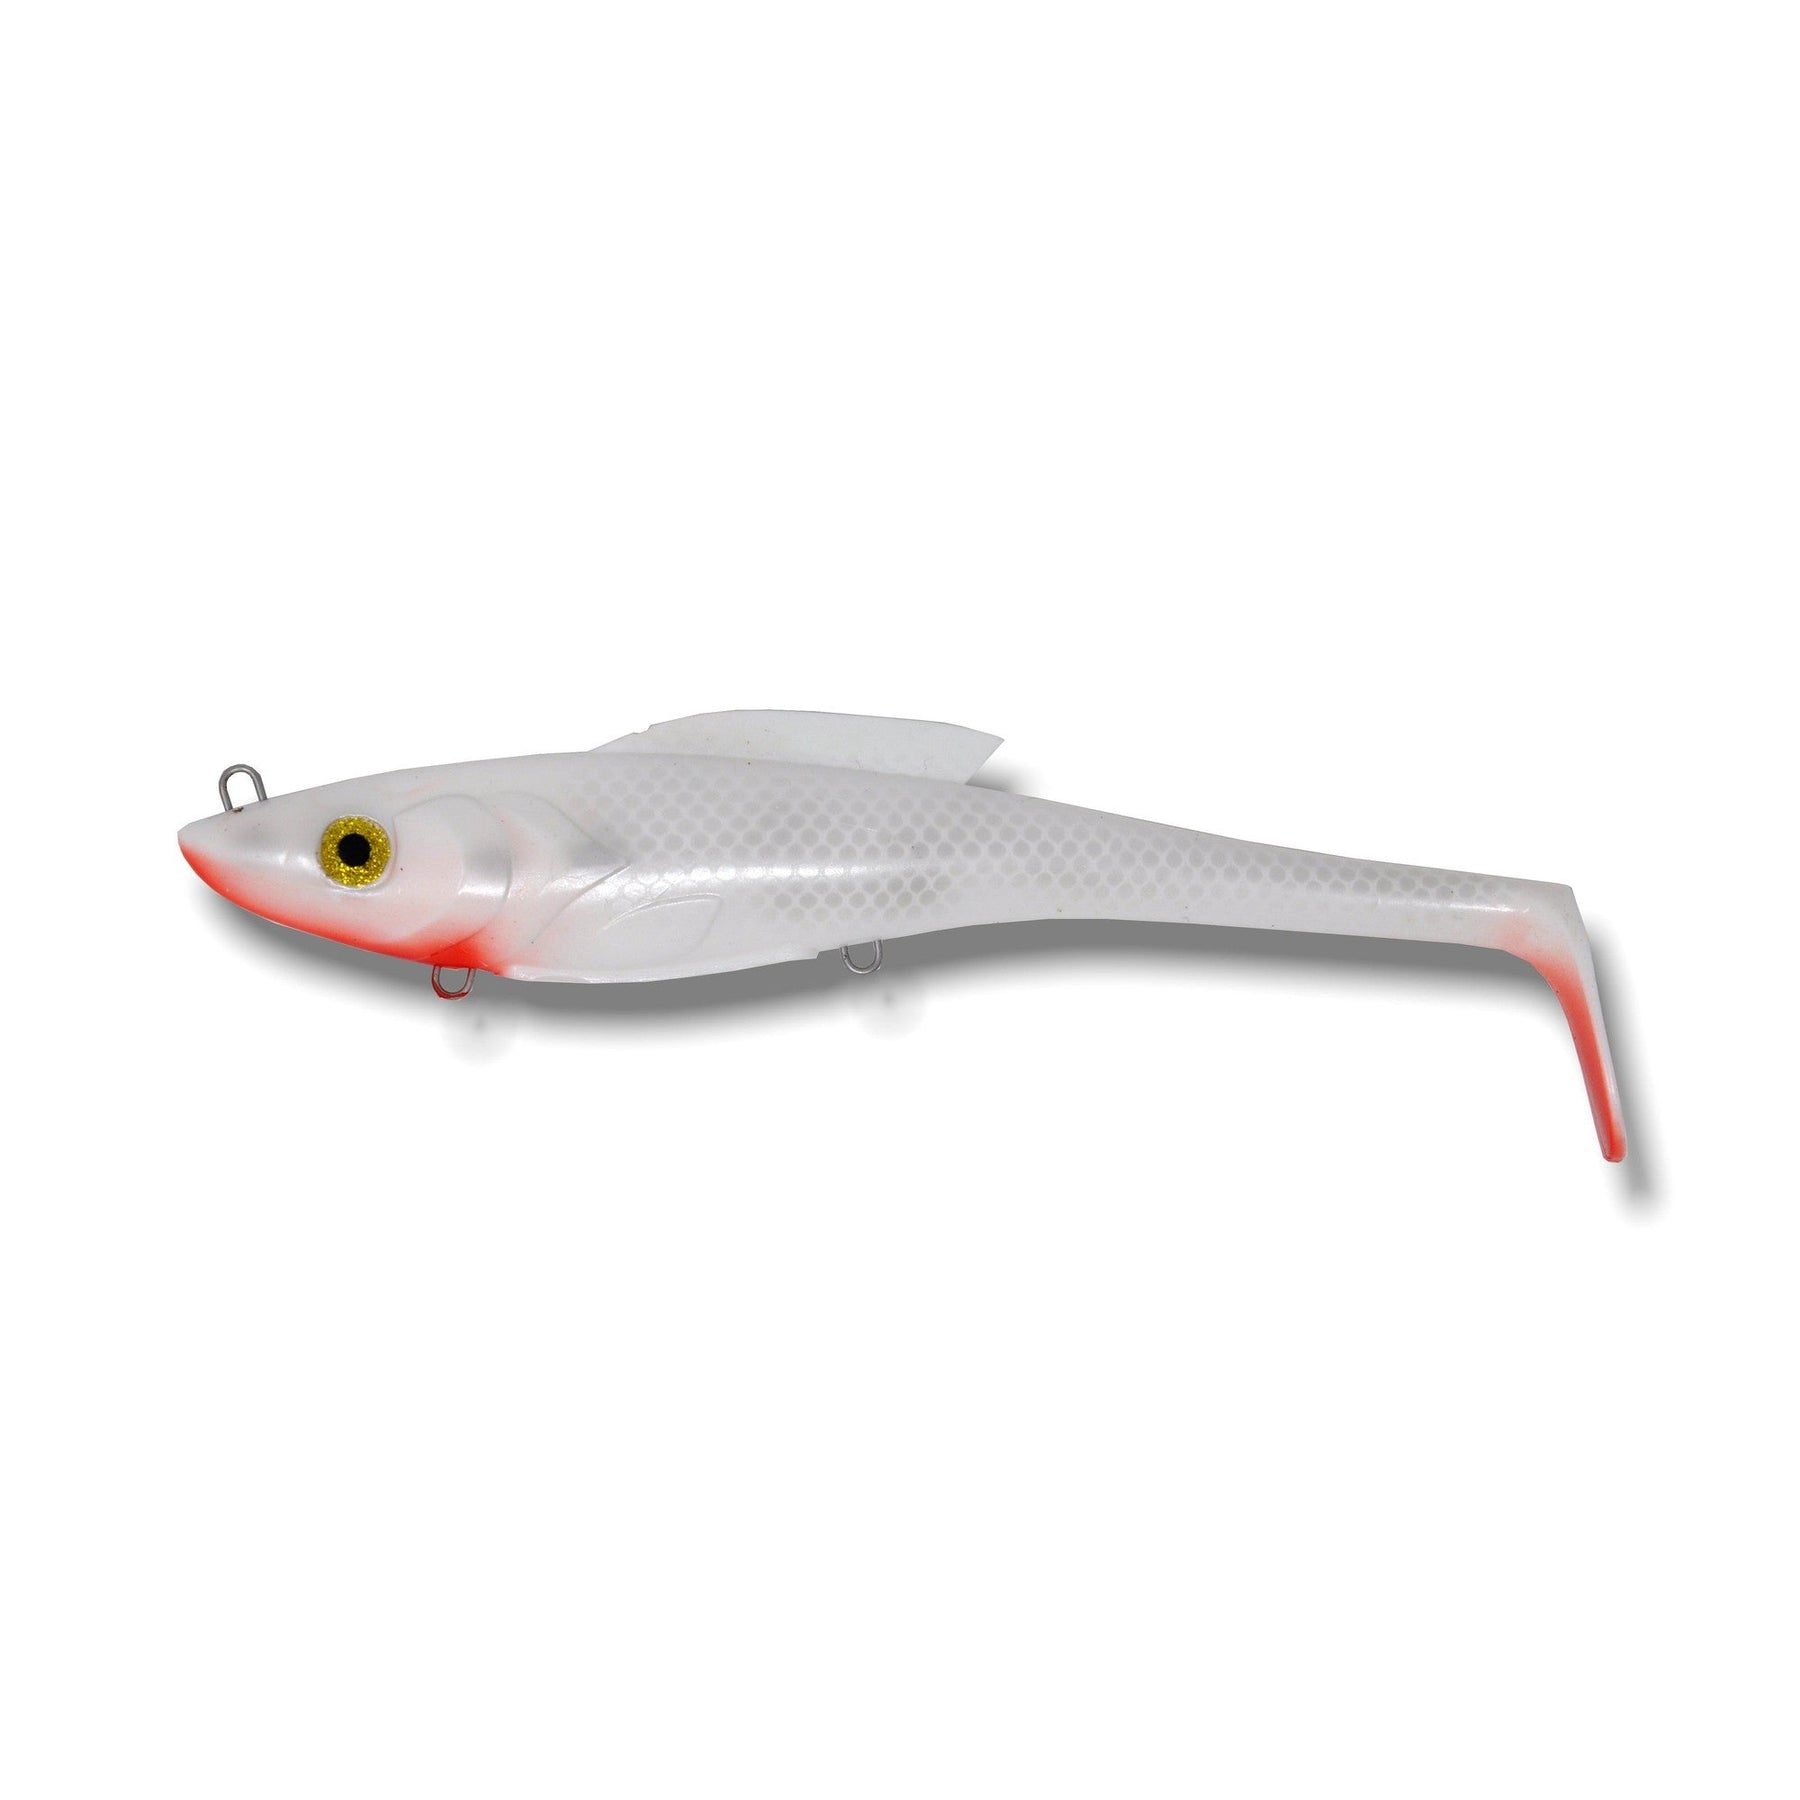 View of Swimbaits Toddy Tickle Baits 11" Warhammer Swimbait Bloody Superman available at EZOKO Pike and Musky Shop